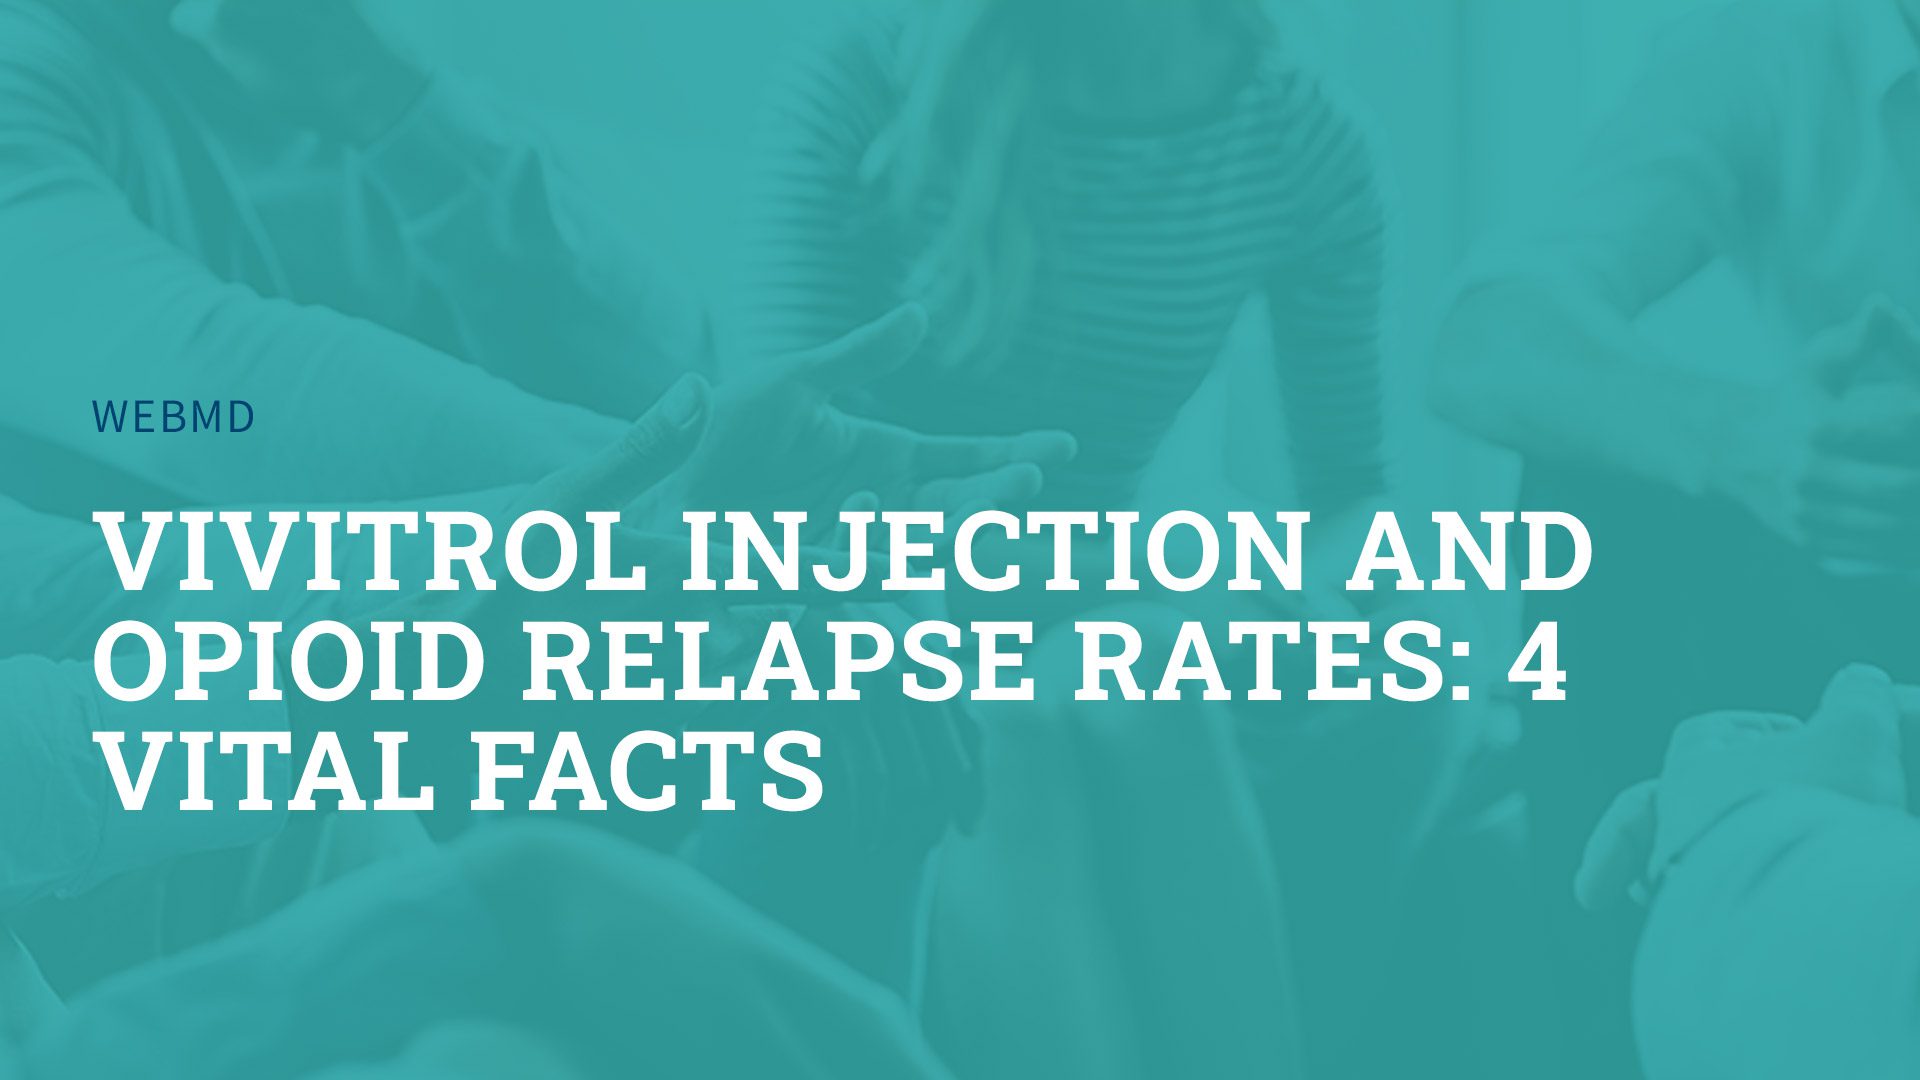 Vivitrol Injection and Opioid Relapse Rates: 4 Vital Facts